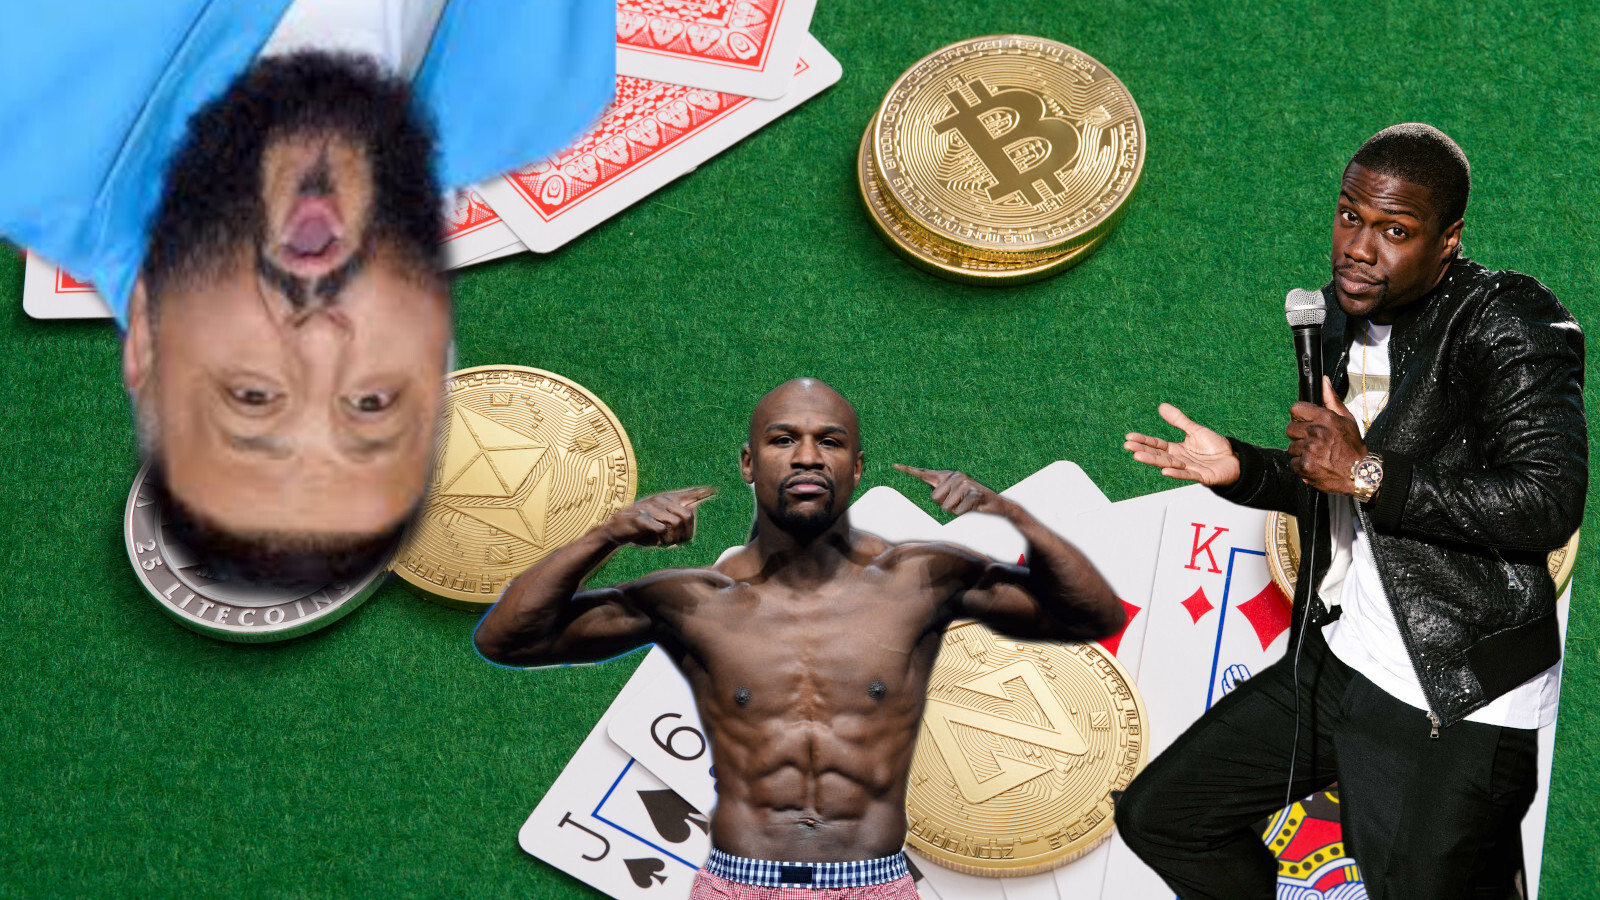 ICO fraud update: DJ Khaled and Mayweather walk free, Kevin Hart next to be investigated